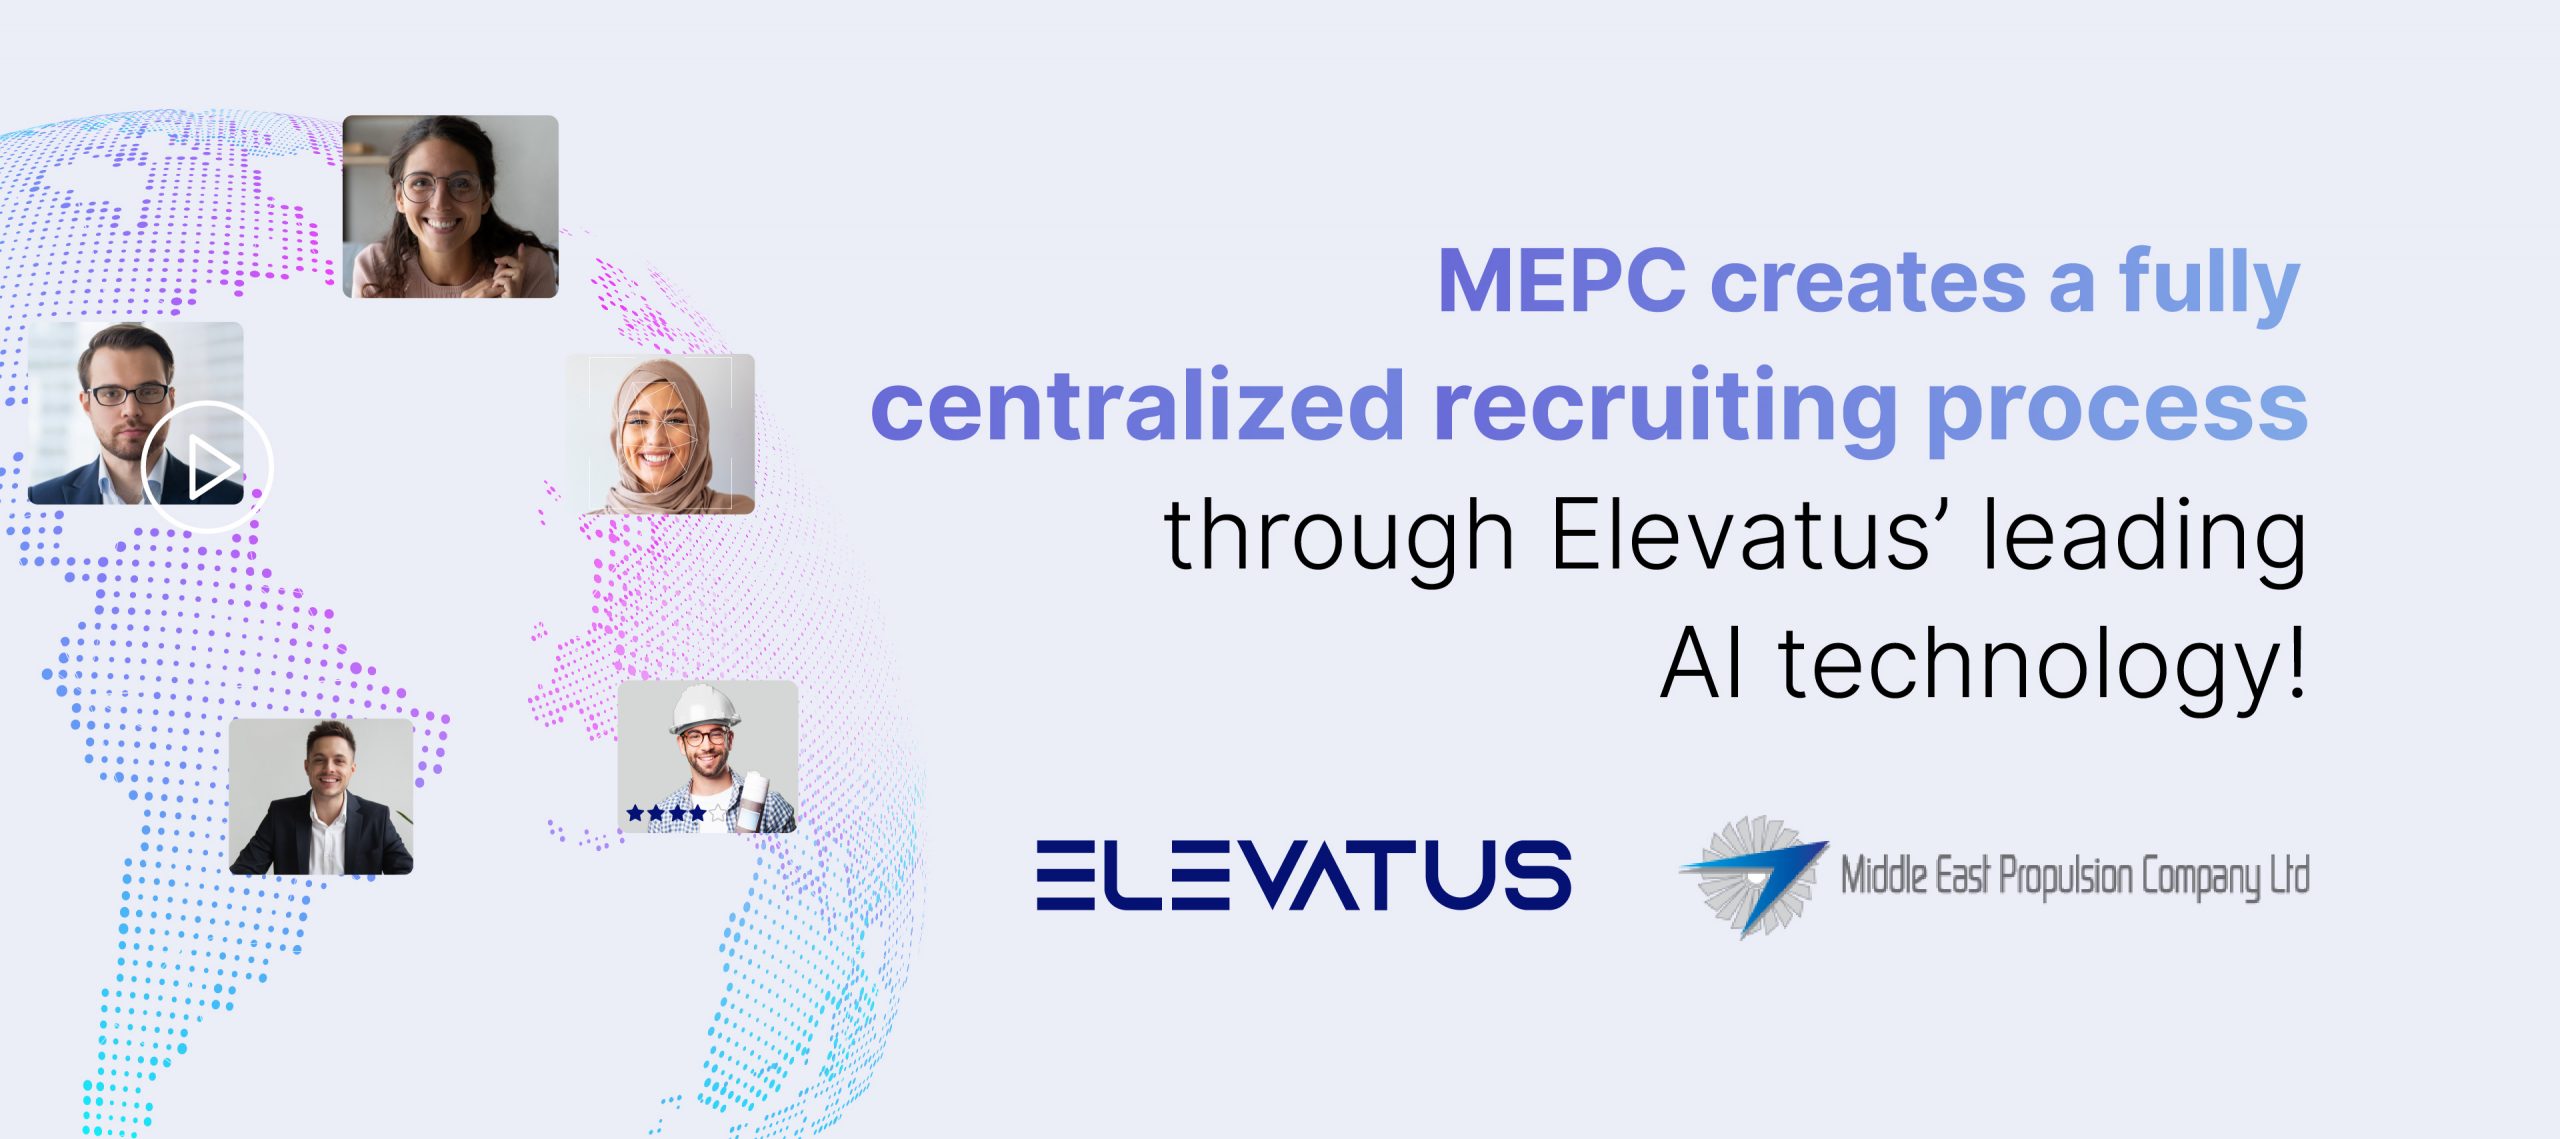 Middle East Propulsion Company (MEPC) Streamlines Recruitment at Scale Through Continued Partnership with Elevatus